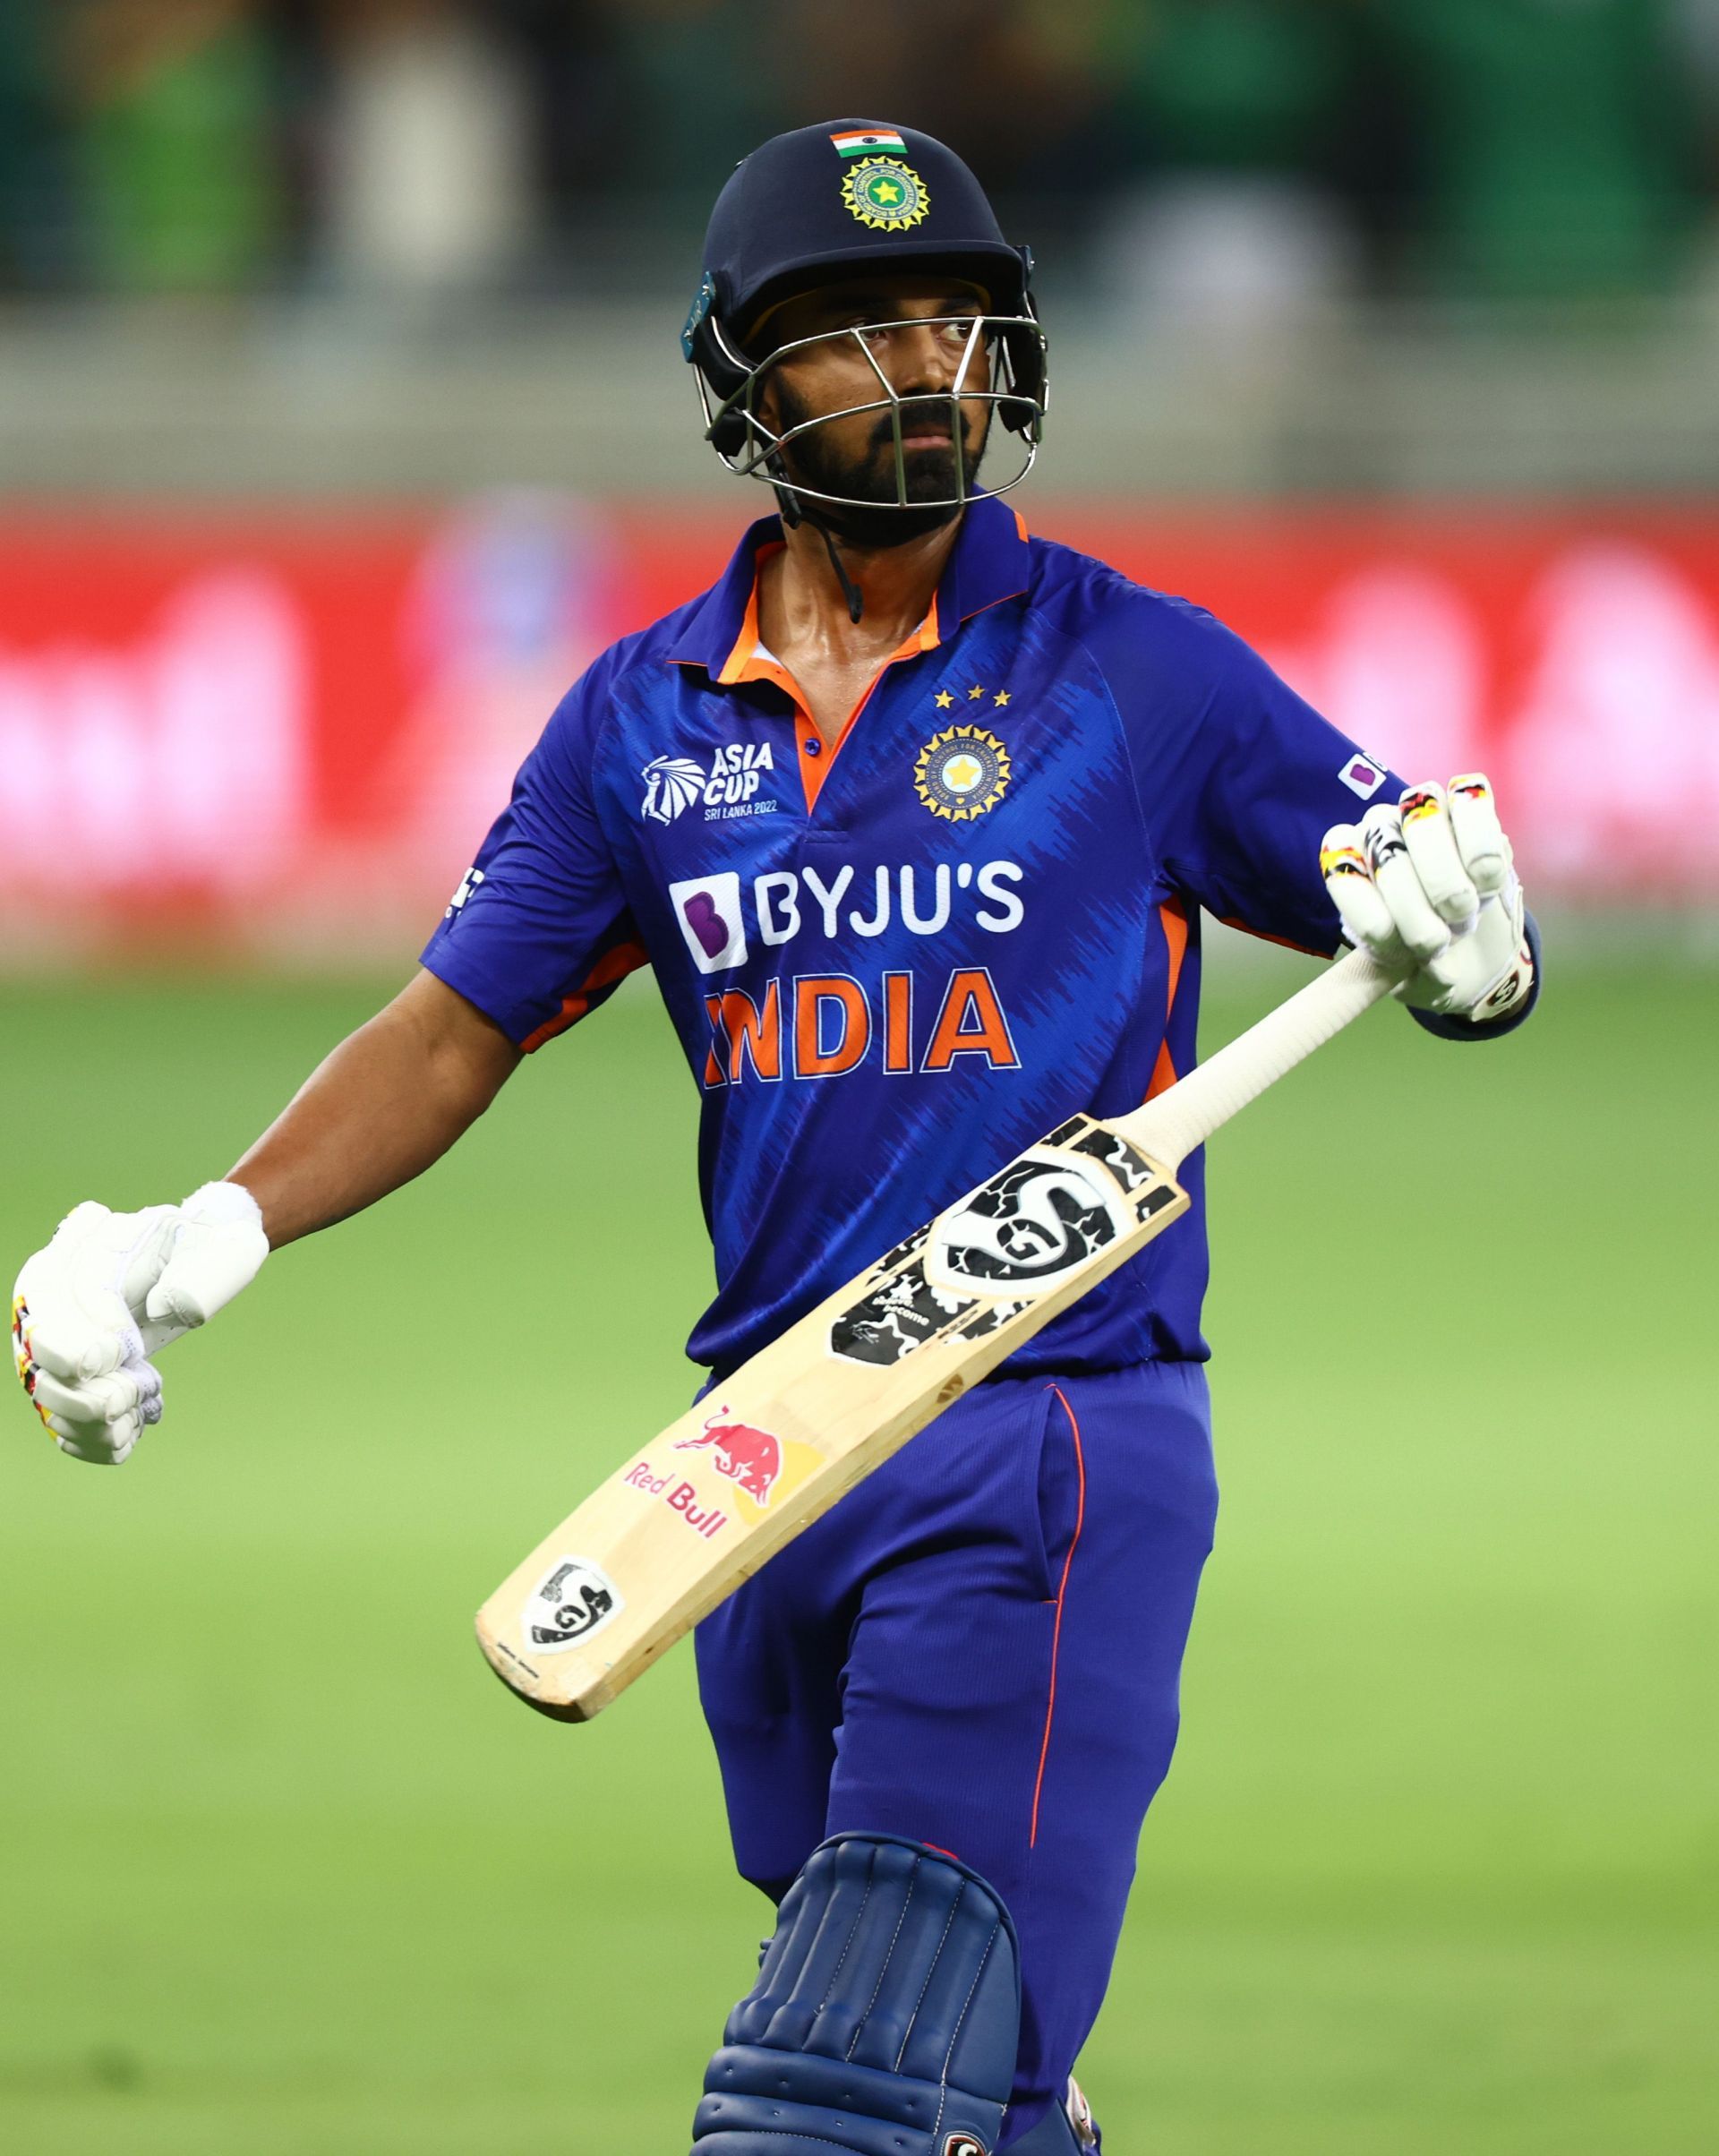 Pakistan v India - KL Rahul went for a golden duck in the all-important fixture [Pic Credit: Getty Images]